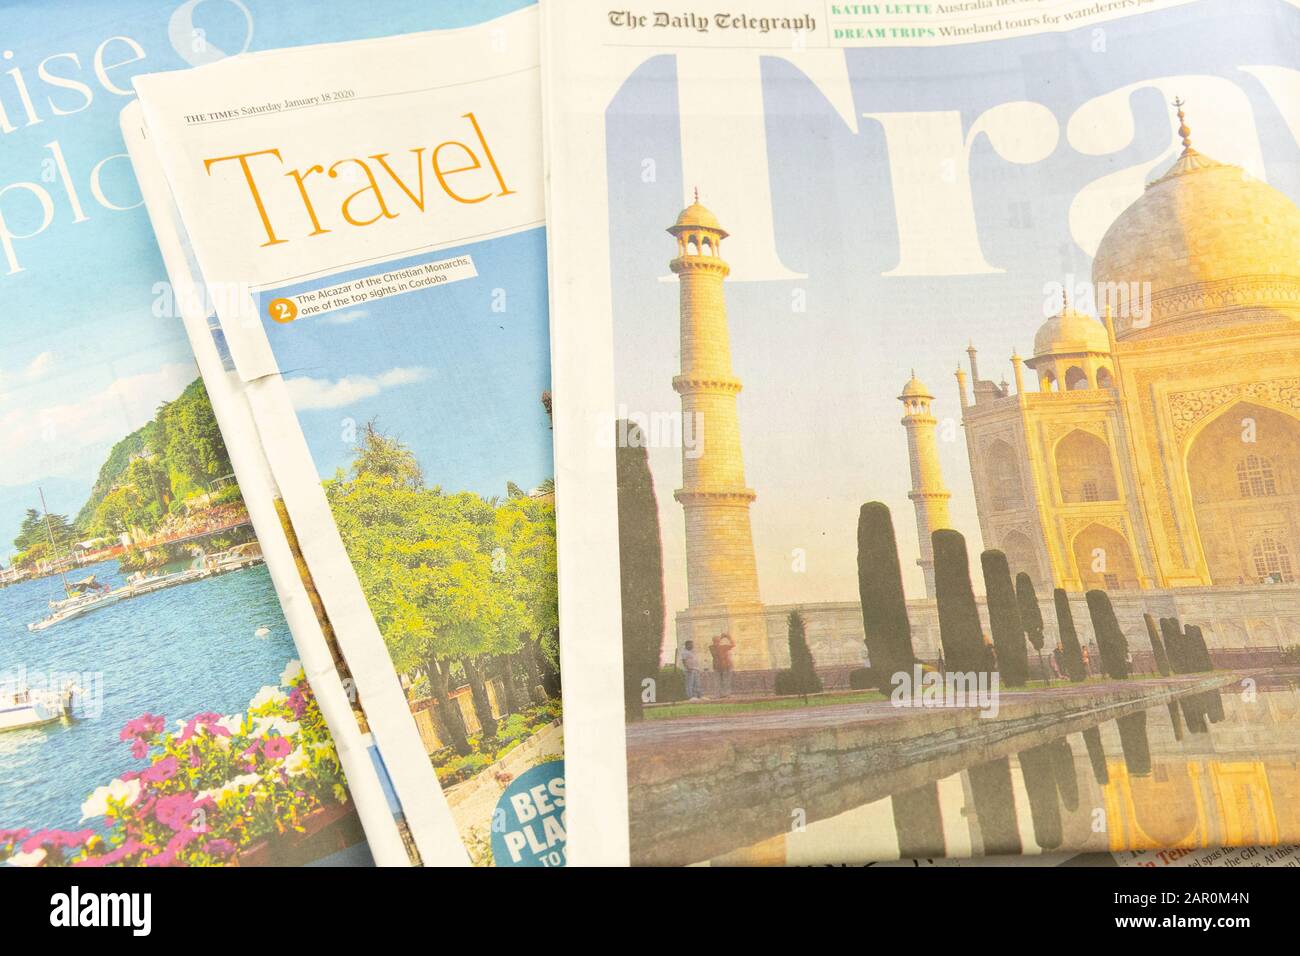 Travel pages of broadsheet papers from the UK Stock Photo